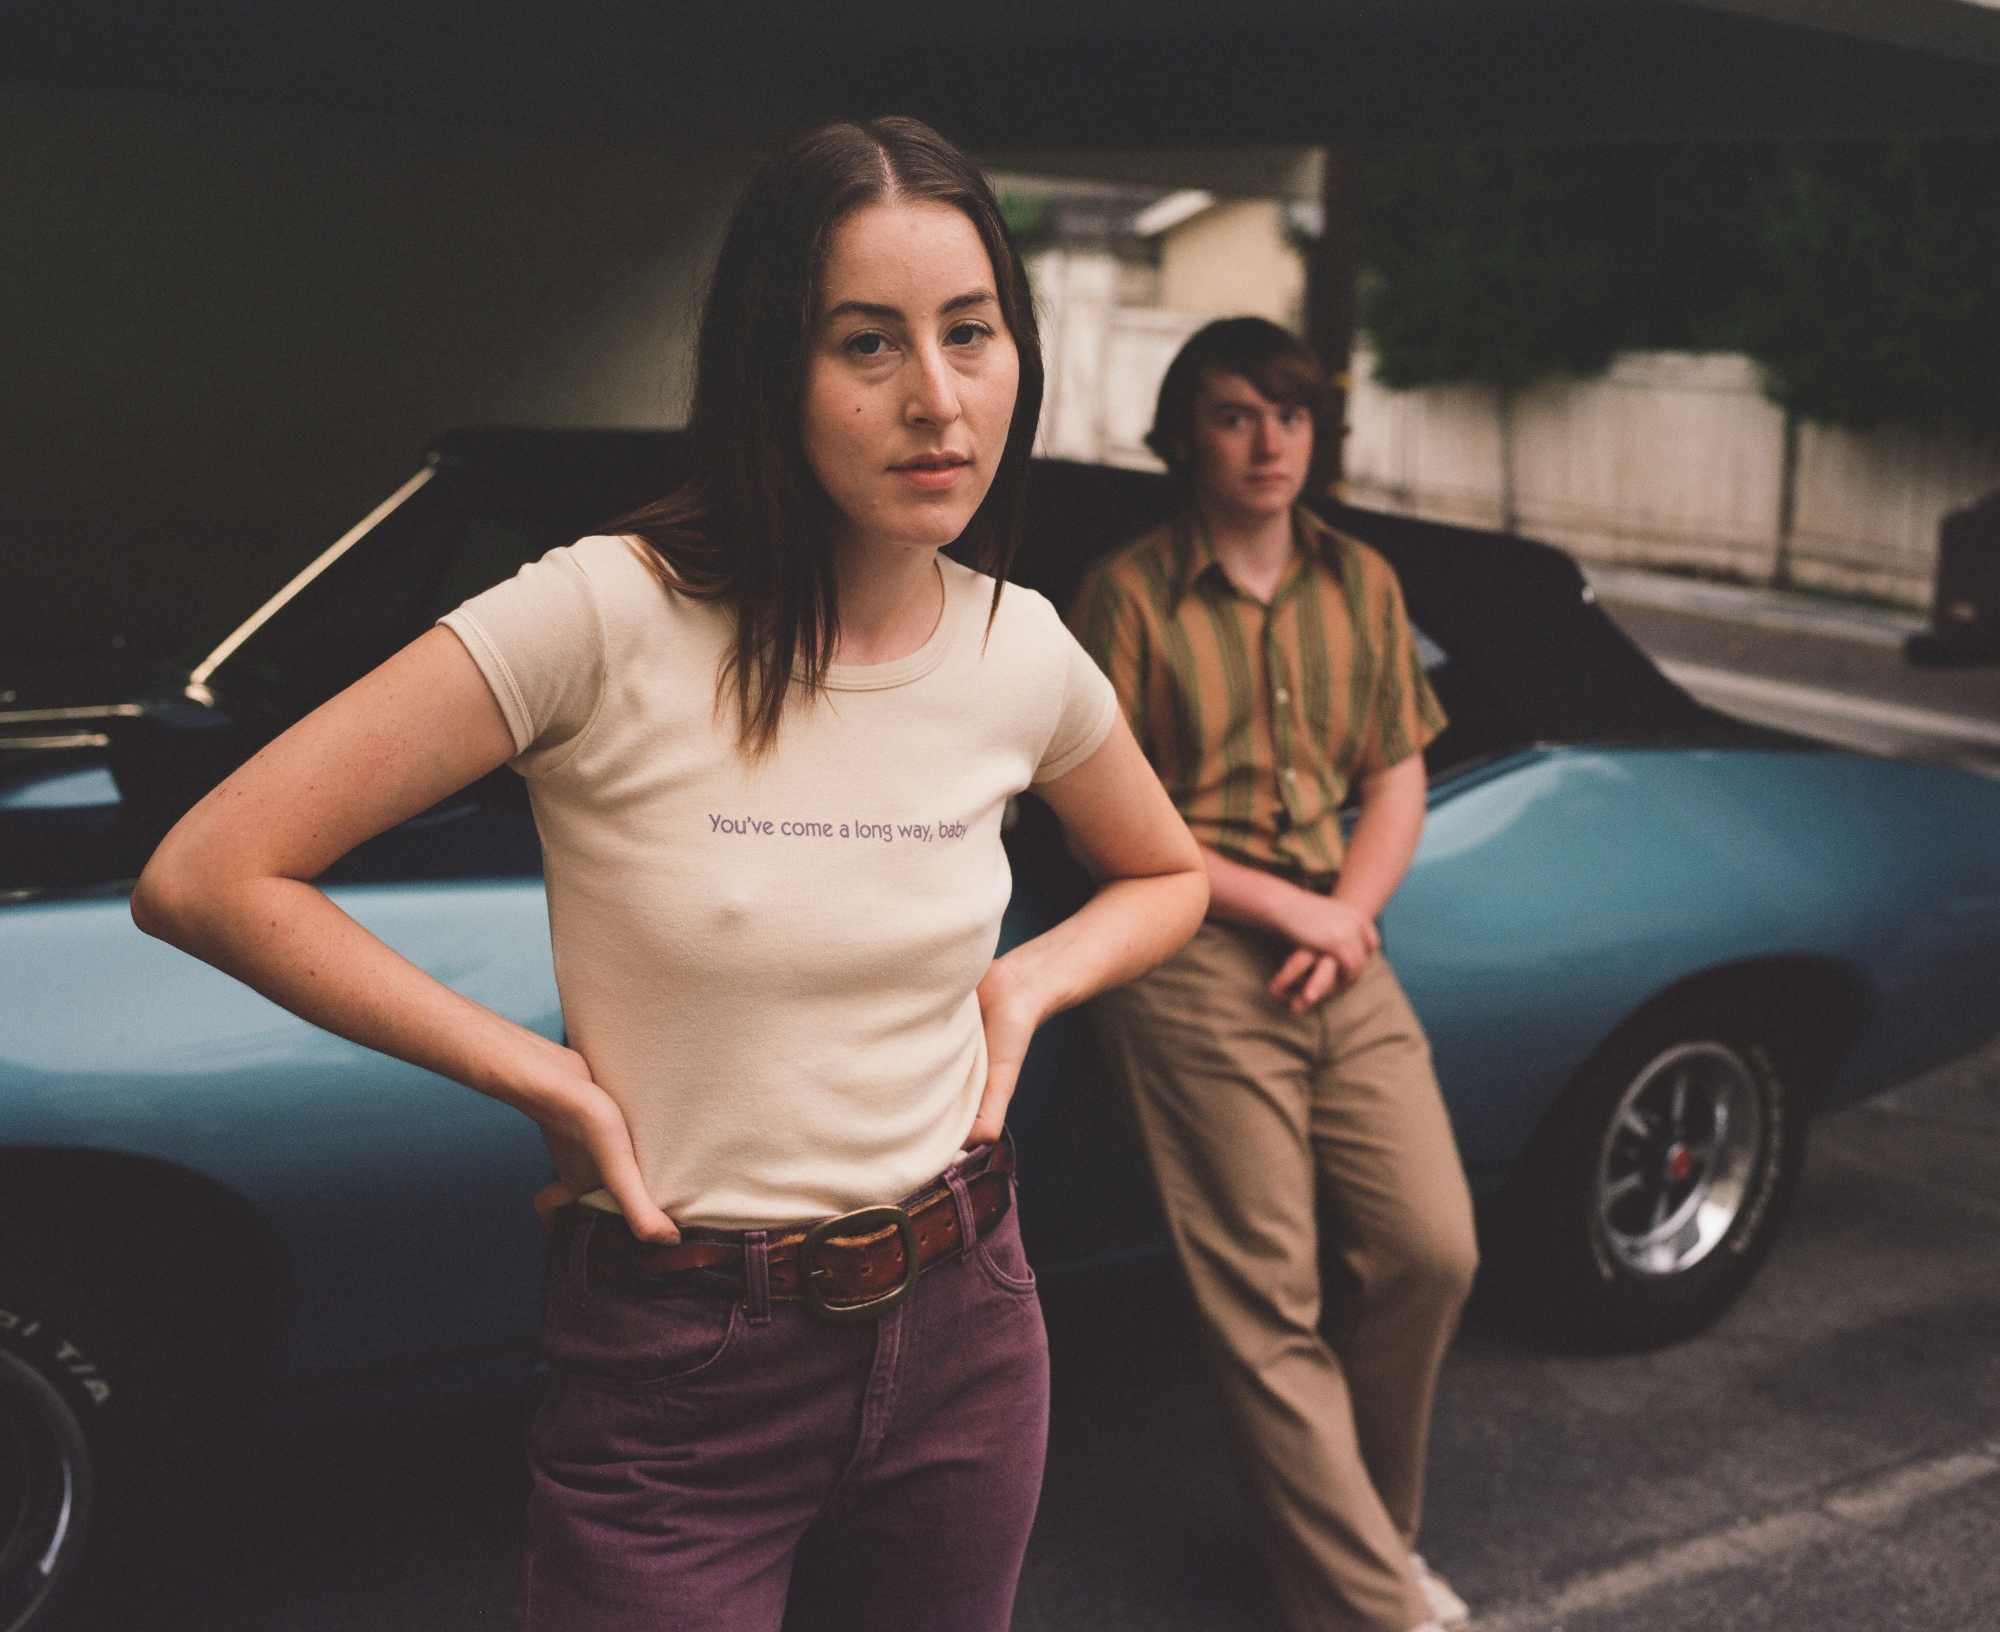 'Licorice Pizza' review actors Alana Haim as Alana Kane and Cooper Hoffman as Gary Valentine standing in front of a blue car